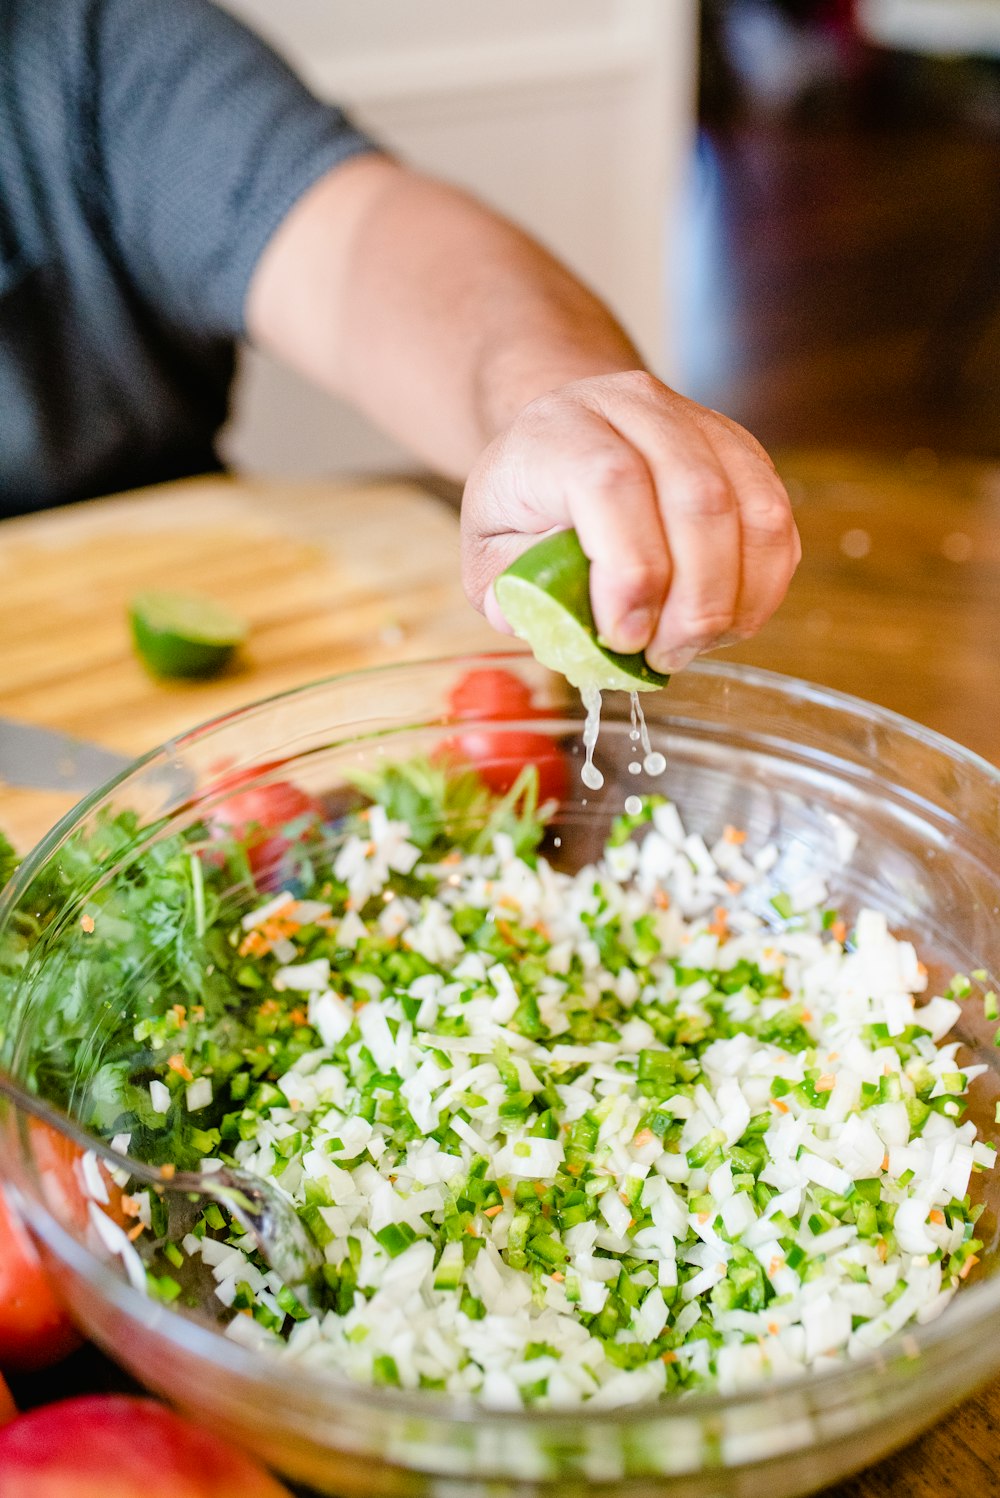 a person is adding ingredients to a salad in a bowl